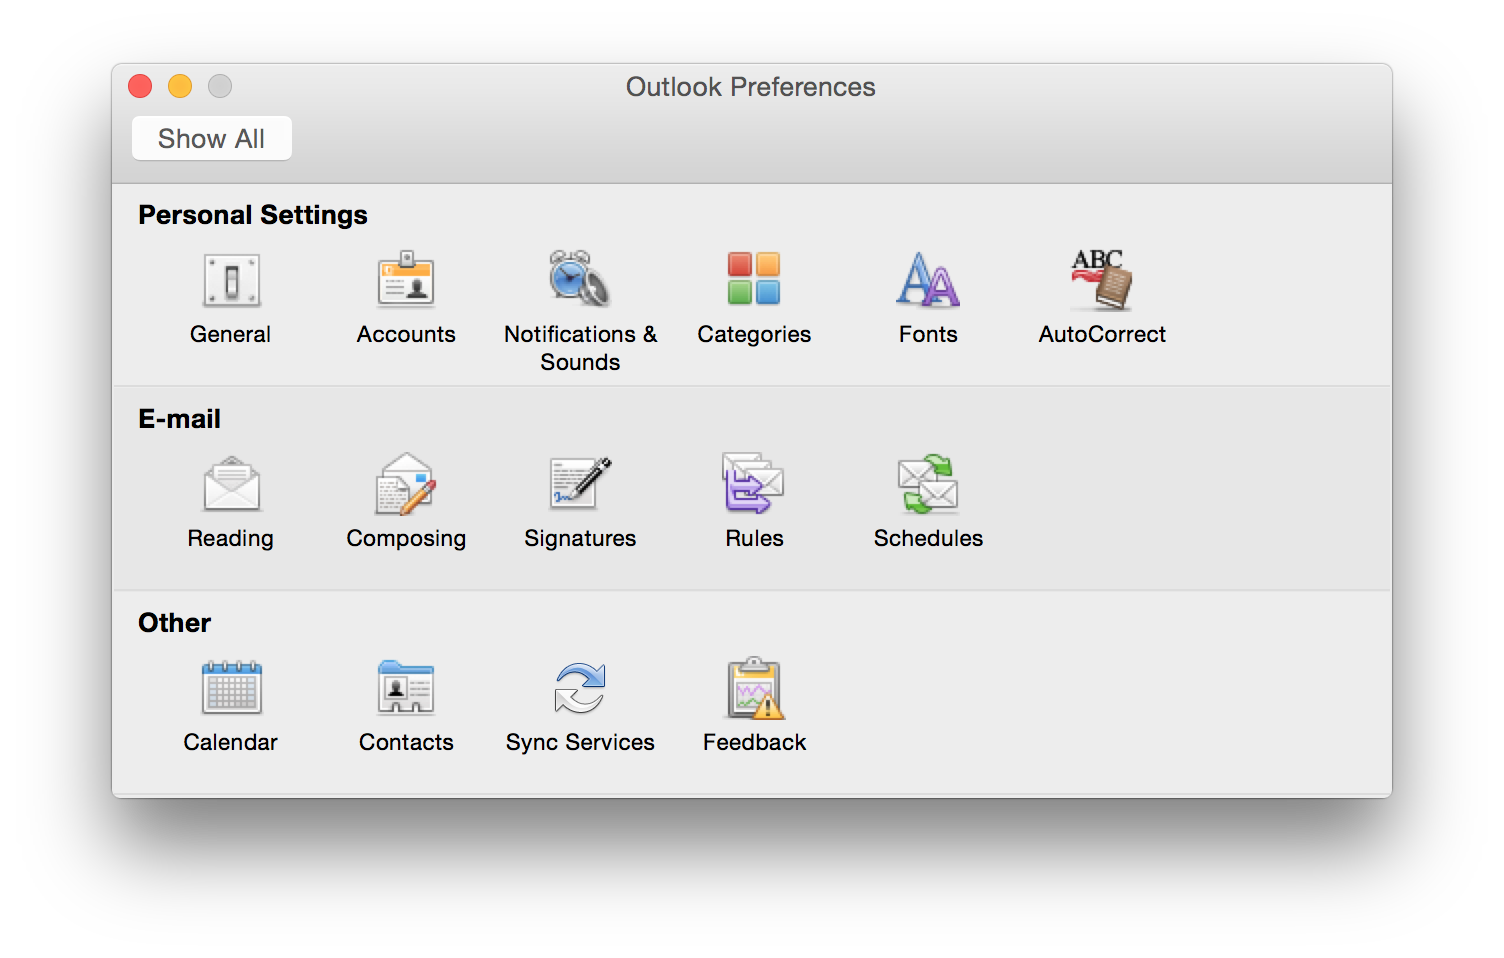 Outlook Preferences